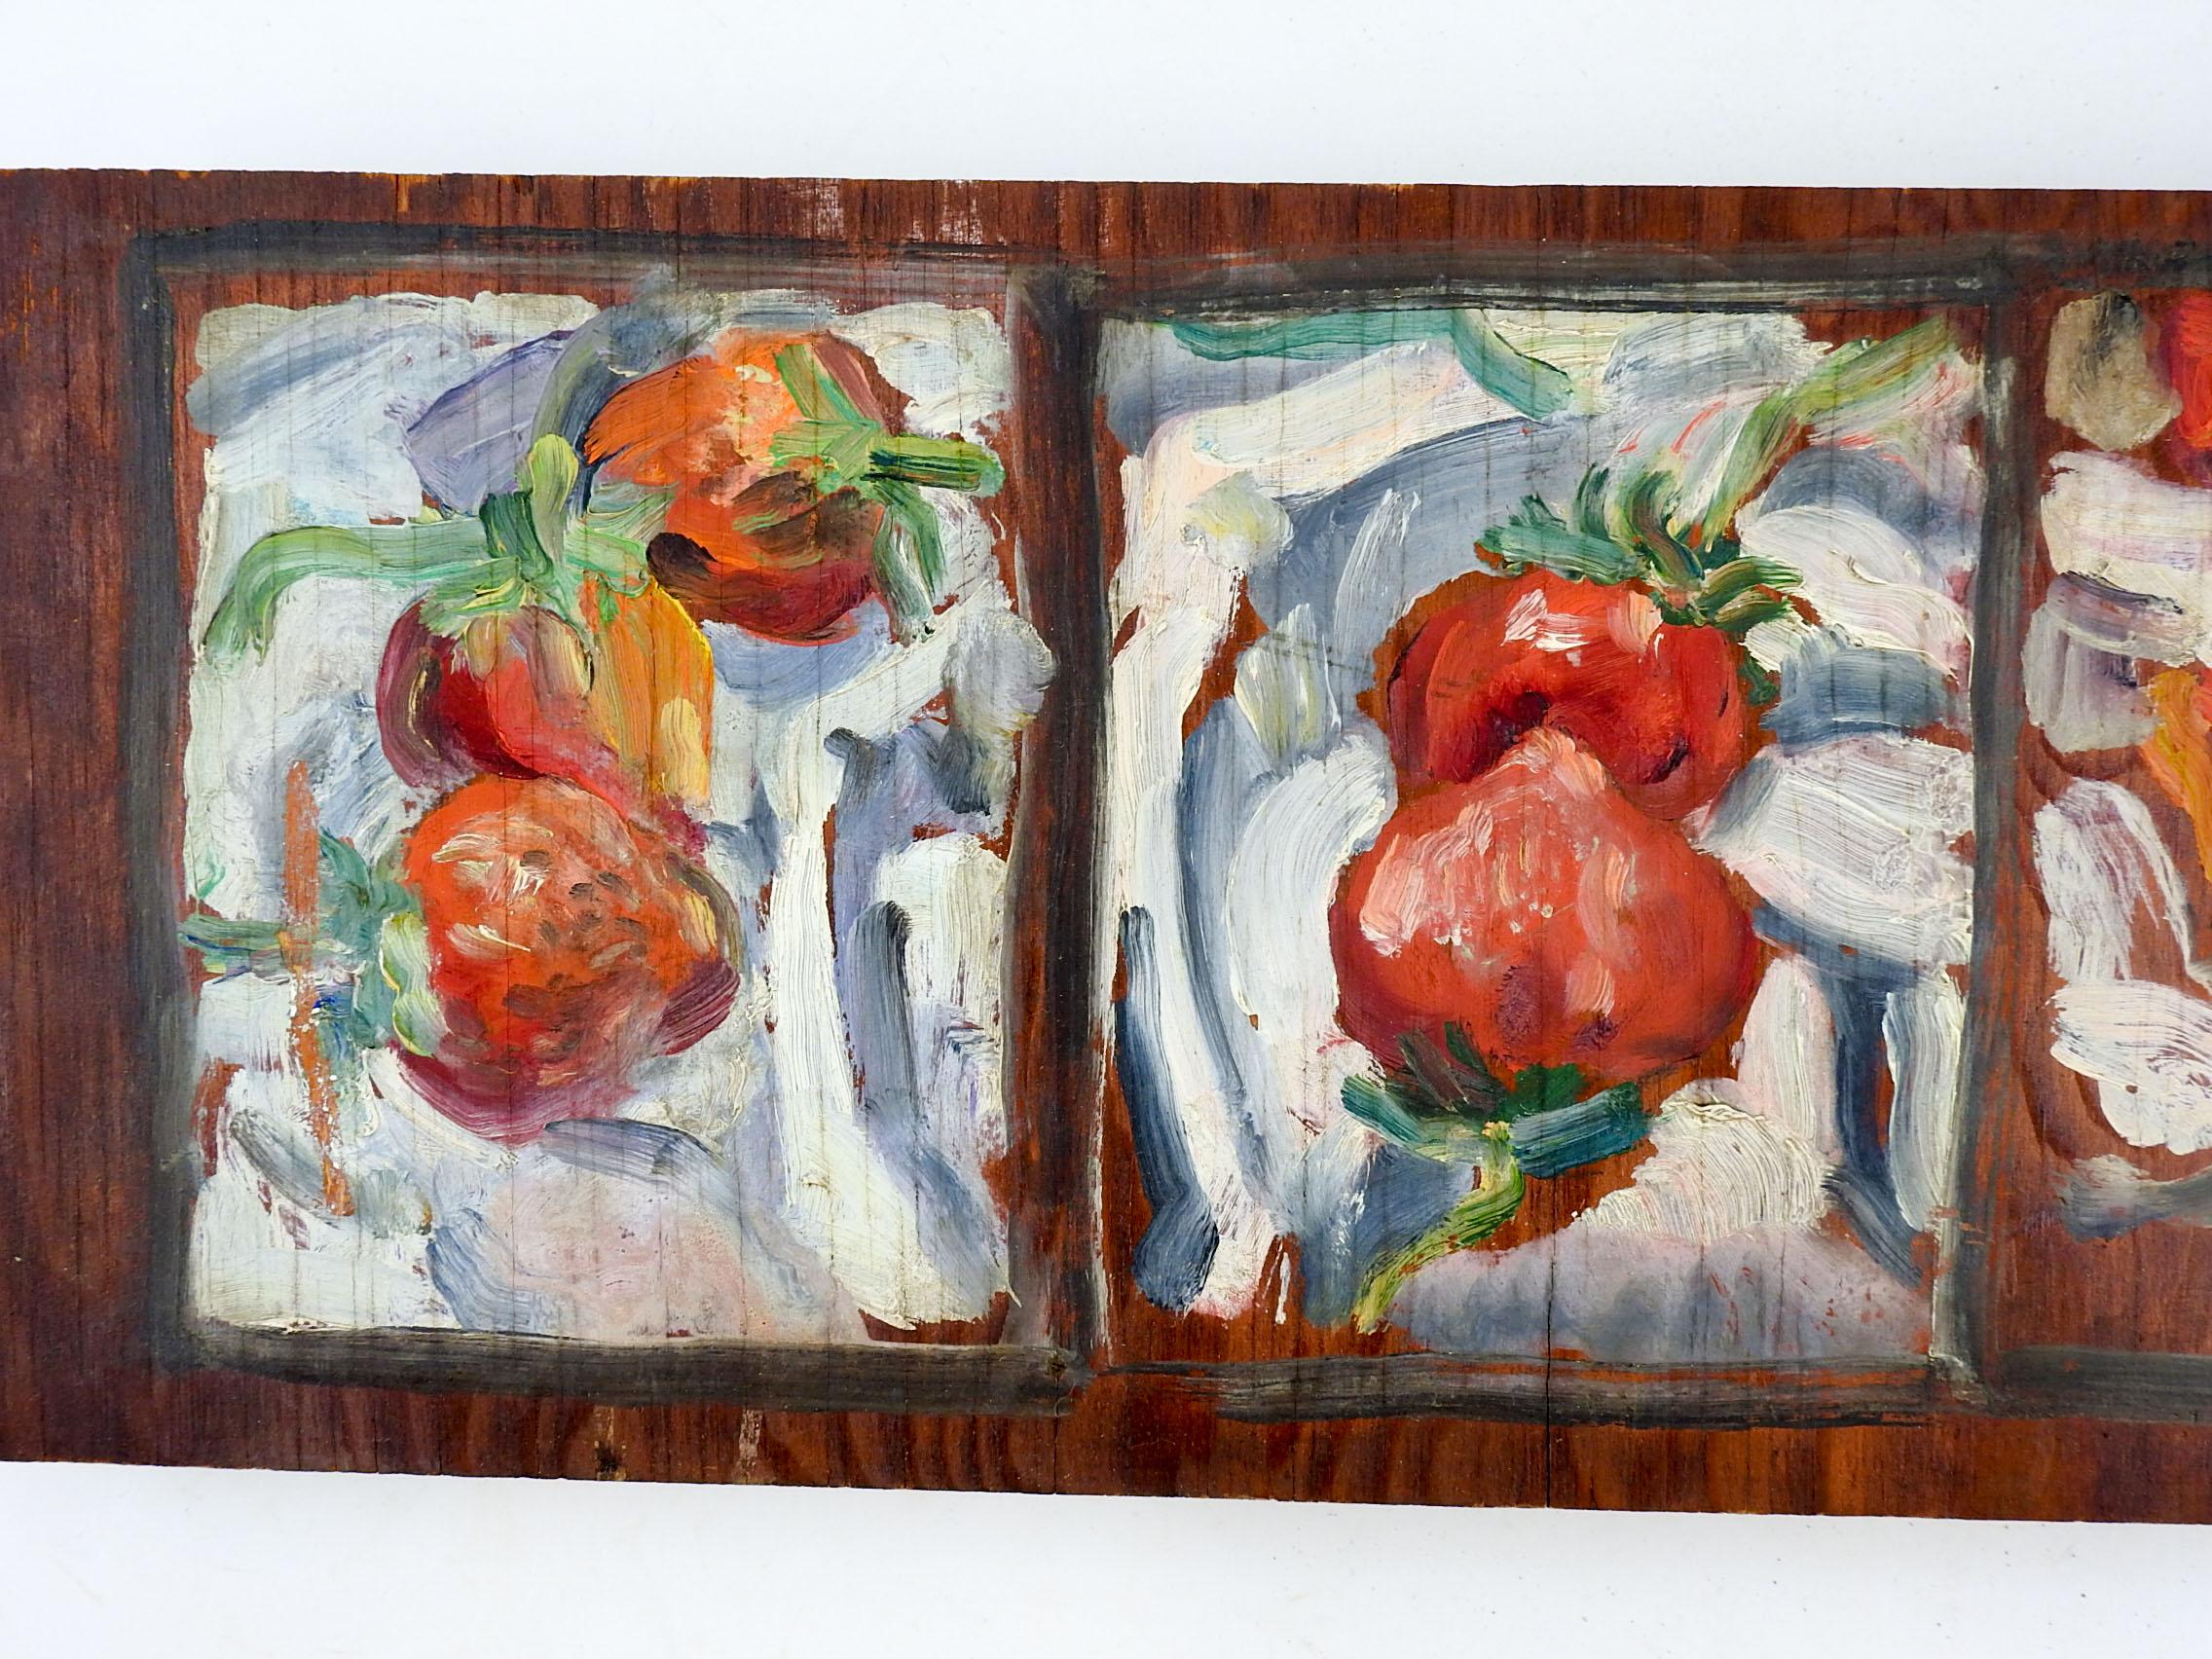 Oil on wood studies of strawberries.  Four studies on one board, unsigned.  Unframed, edge wear to wood.